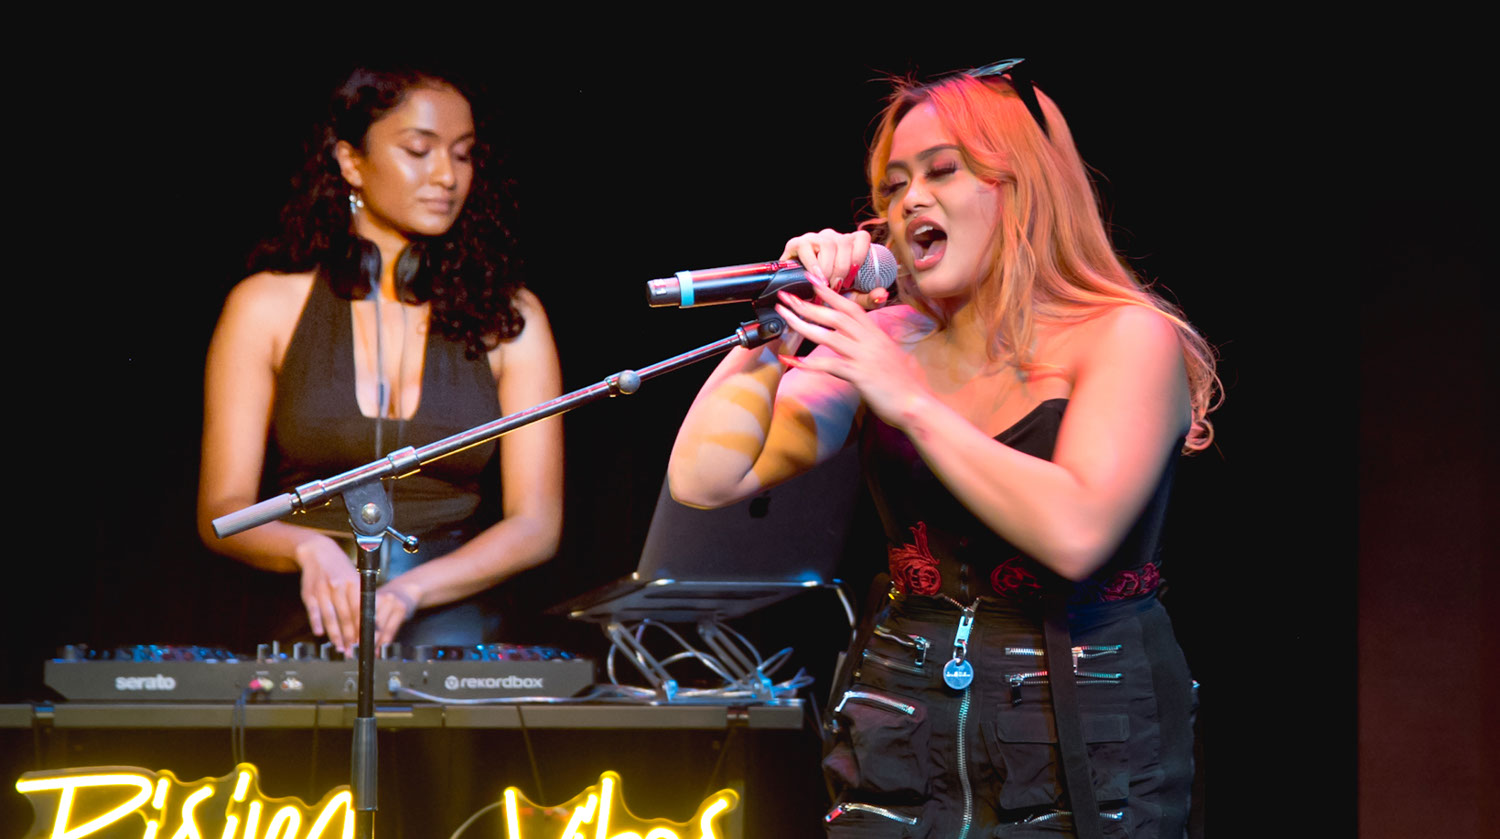 Image of two young women performing. The woman to the left has medium-toned skin and wears a black tank top. Around her neck is a set of headphones. She manipulates the turntable below her with her hands. The woman to the right has light-toned skin and orange hair. She wears a black tank top with red embroidery. In front of her is a microphone on a stand. She wraps her hands around the microphone and sings into it. 